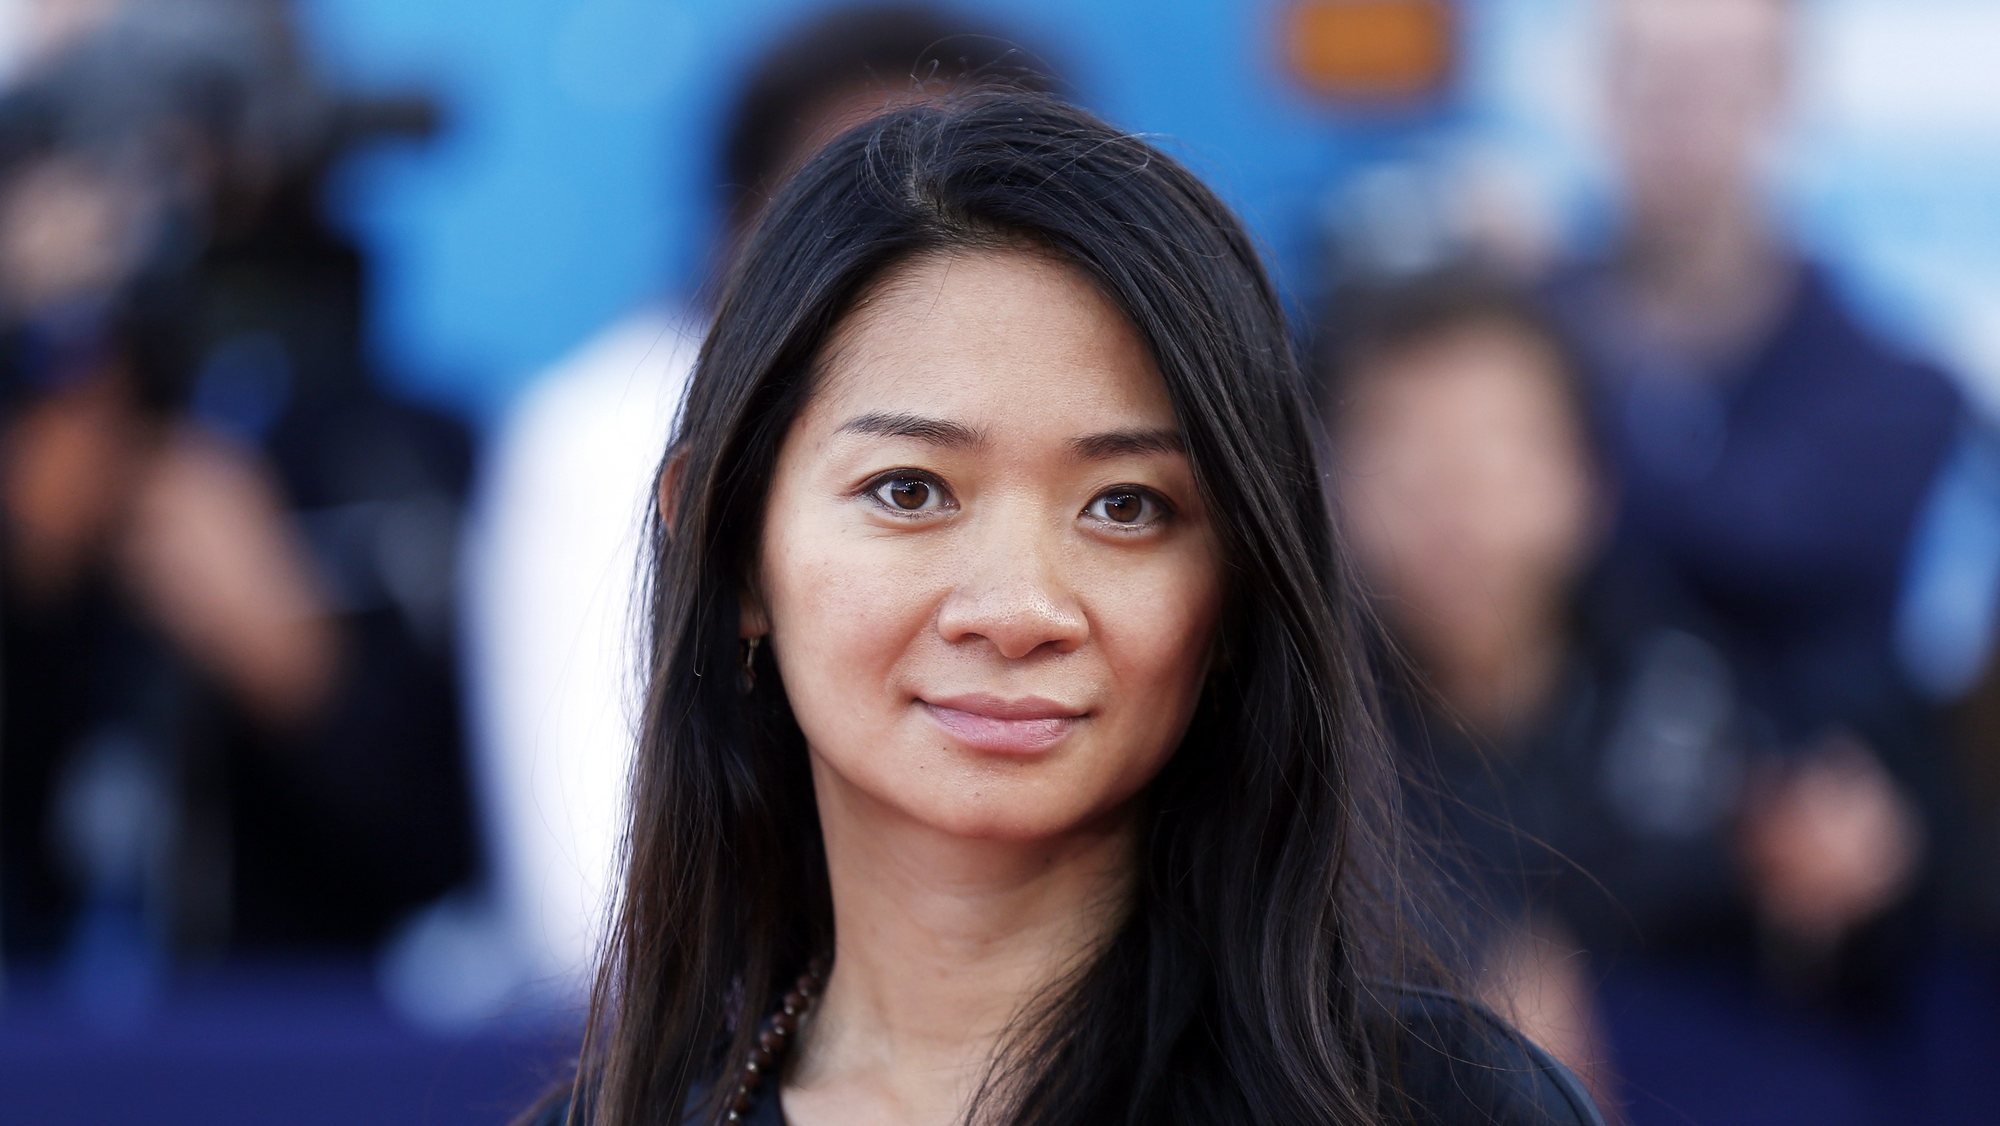 epa08984427 (FILE) - China-US film director Chloe Zhao arrives on the red carpet during 41st Deauville American Film Festival, in Deauville, France, 06 September 2015 (reissued 03 February 2021). Chloe Zhao was nominated as Best Director for &#039;Nomadland&#039; for the 78th Annual Golden Globe Awards. The Golden Globes 2021 are planned to take place virtually on 28 February.  EPA/ETIENNE LAURENT